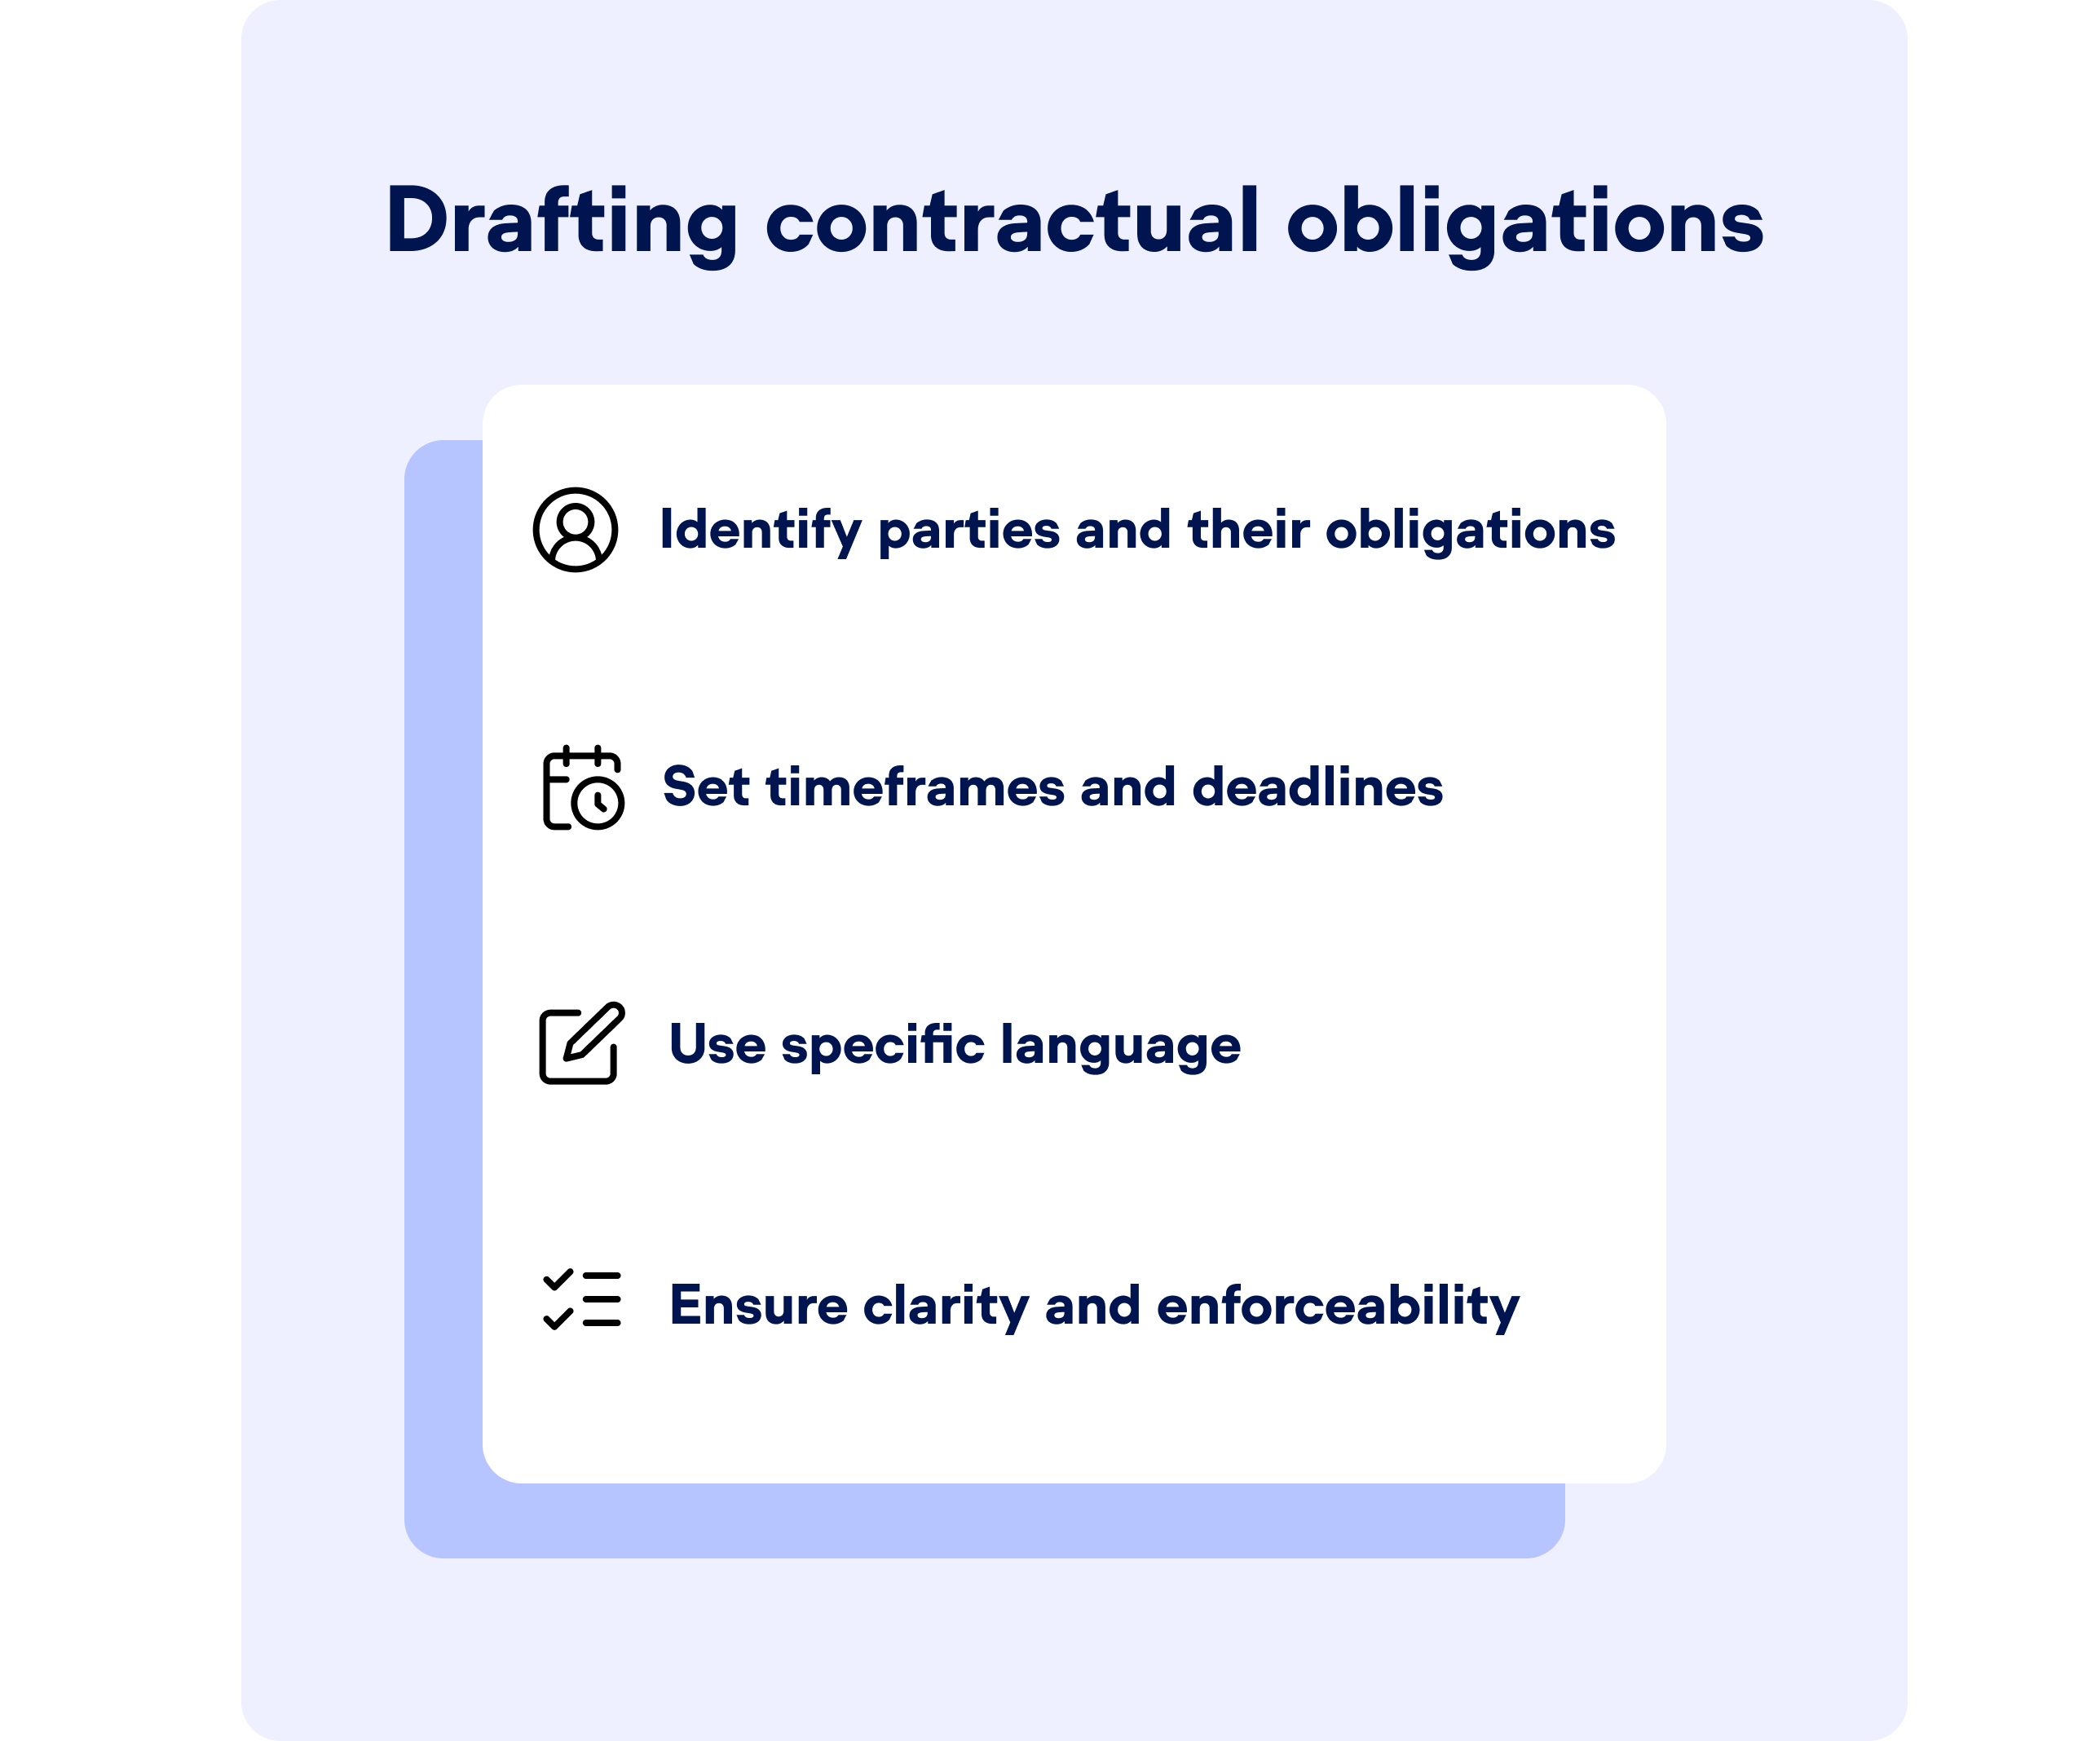 Infographic describing how to draft contractual obligations. The list states: 1) identify parties and their obligations, 2) set timeframes and deadlines, 3) use specific language, 4) ensure clarity and enforceability.